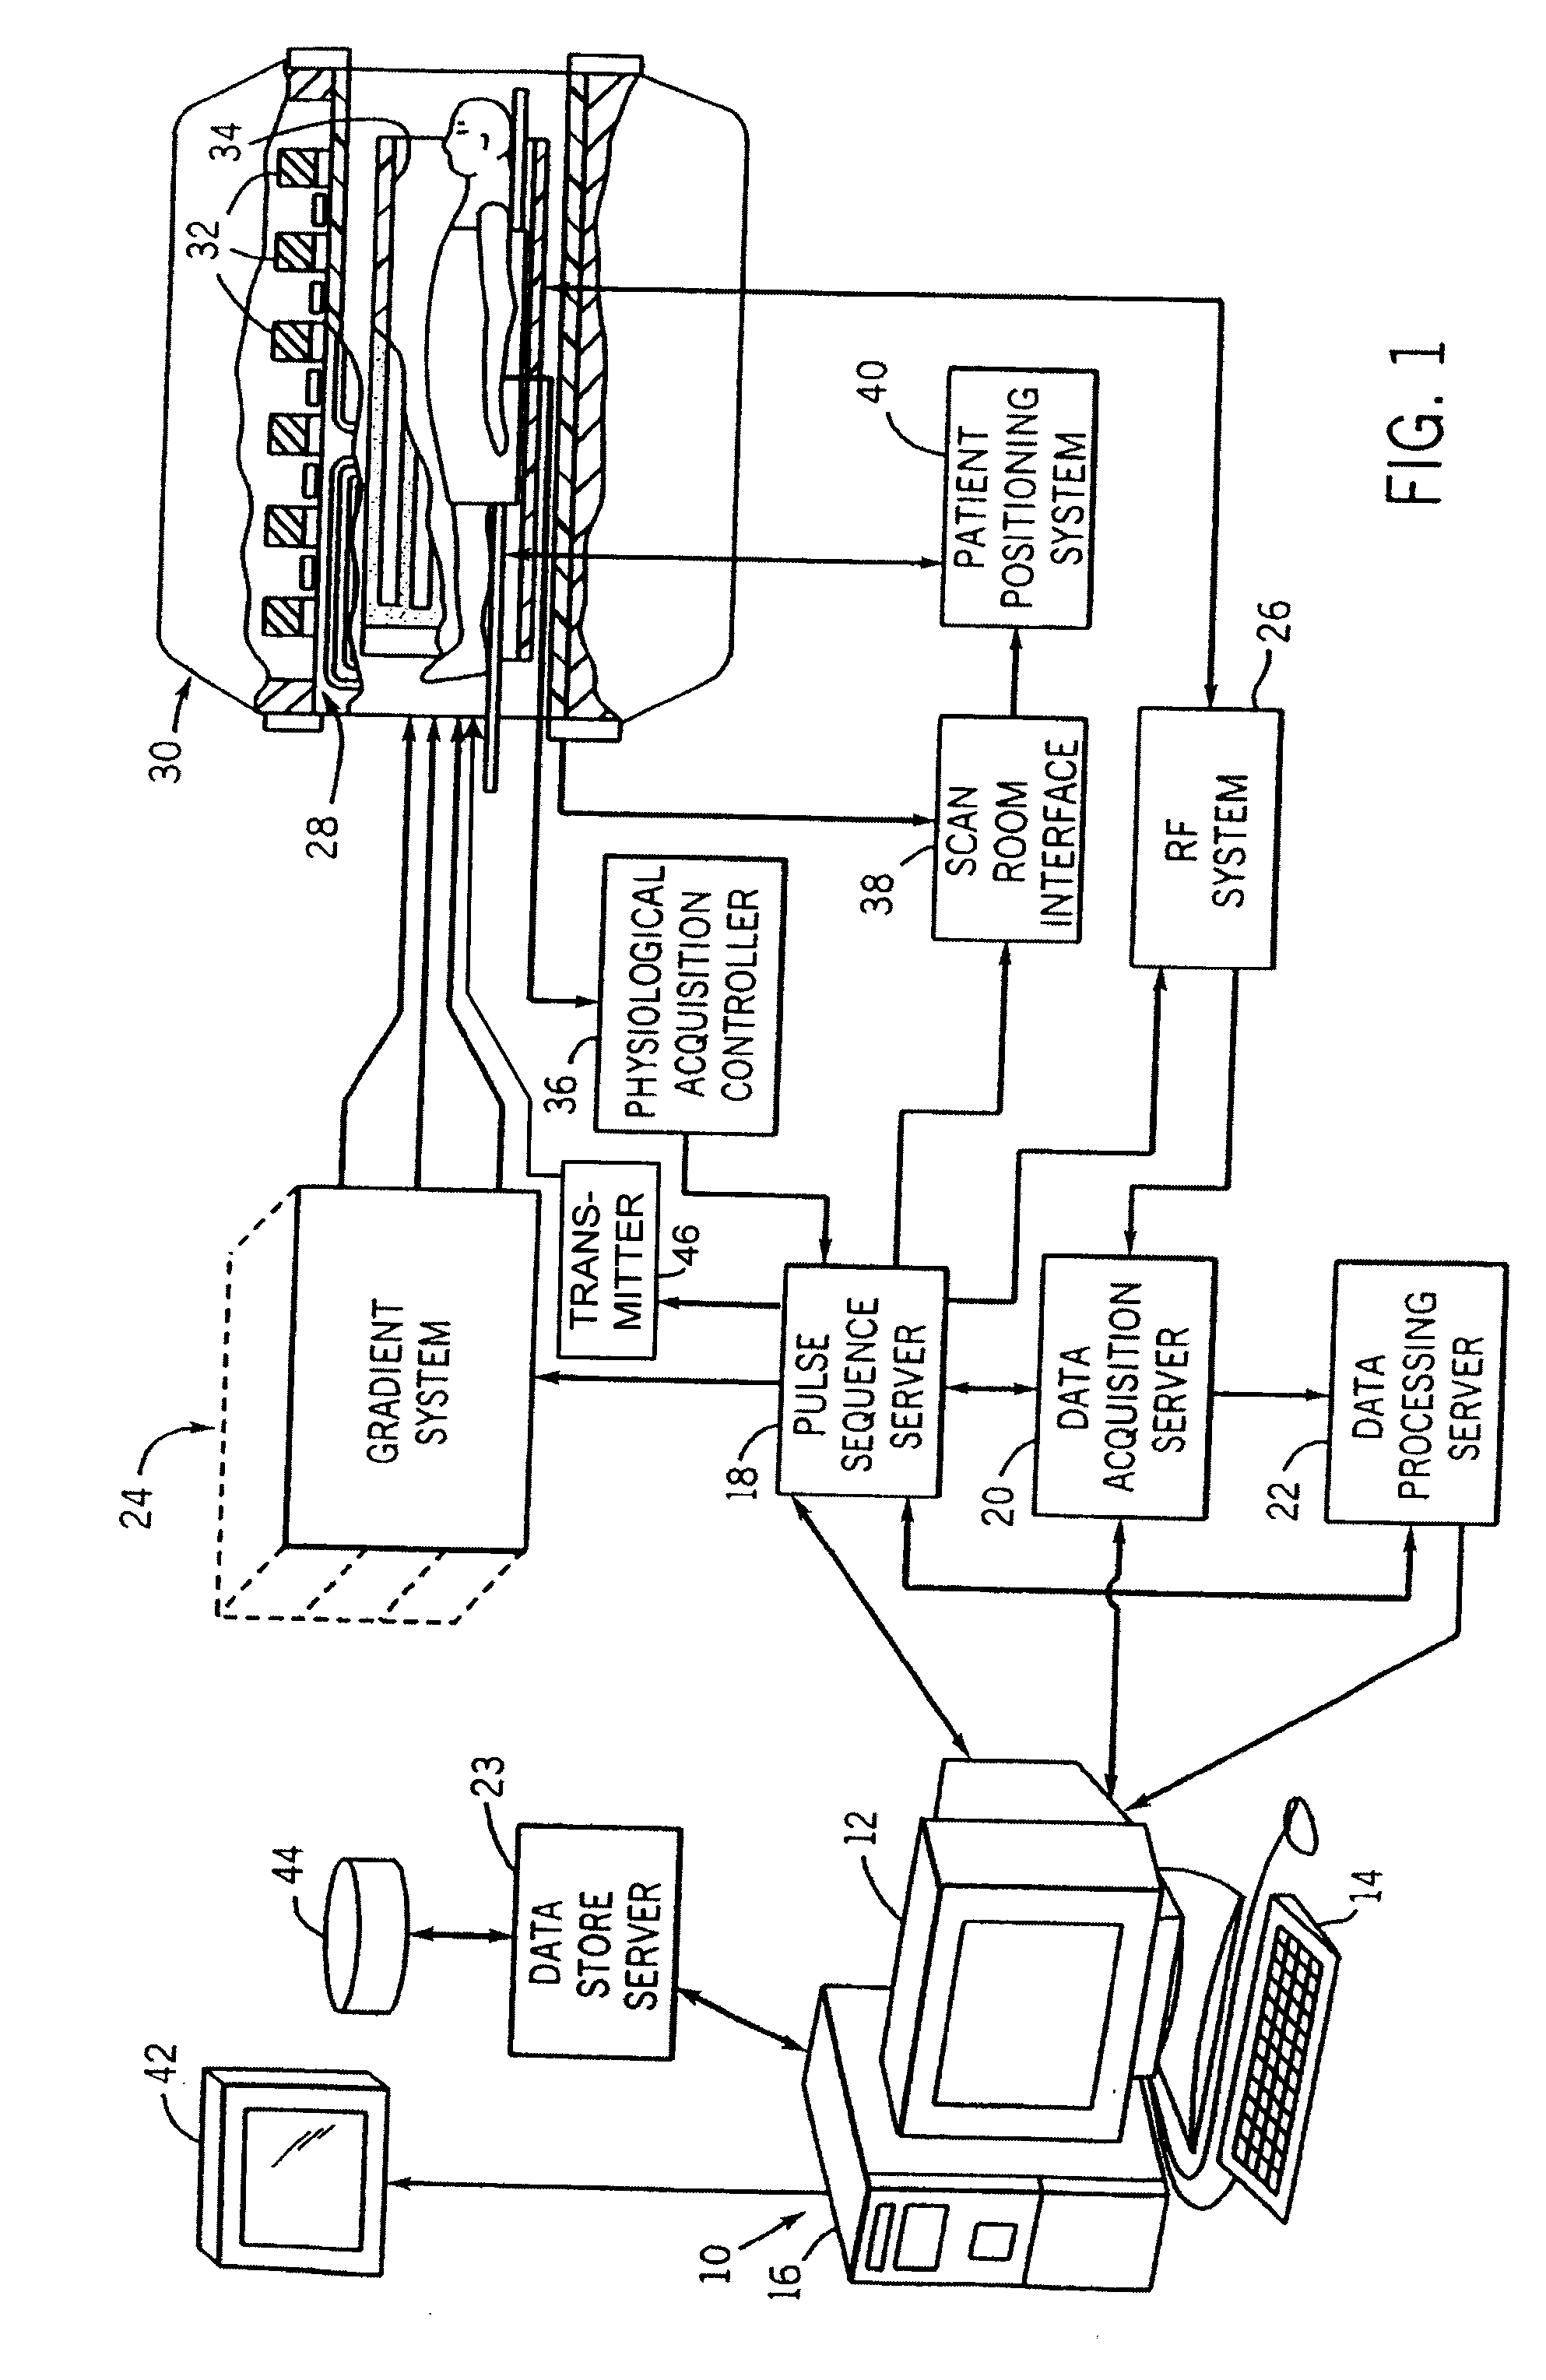 System and Method for Direct Digitization of NMR Signals